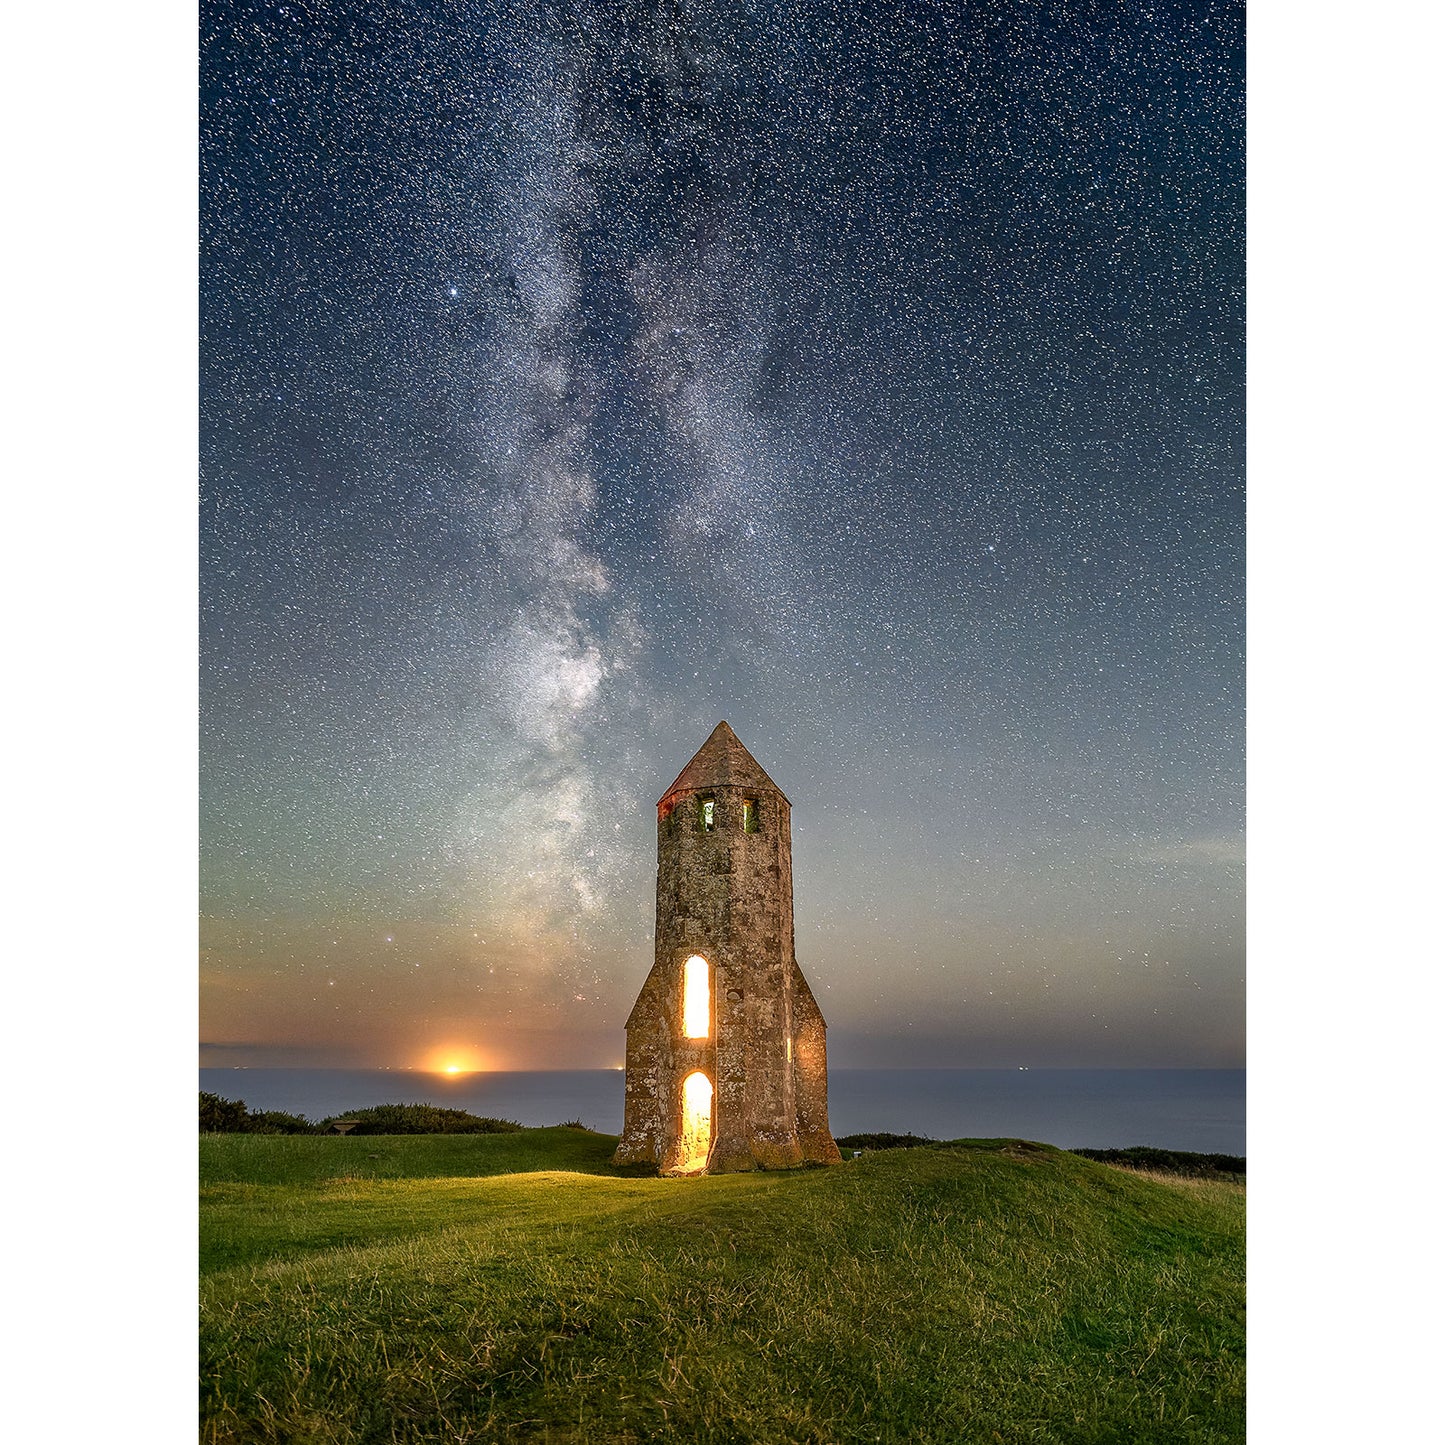 Milky Way, St. Catherine's Oratory - Available Light Photography